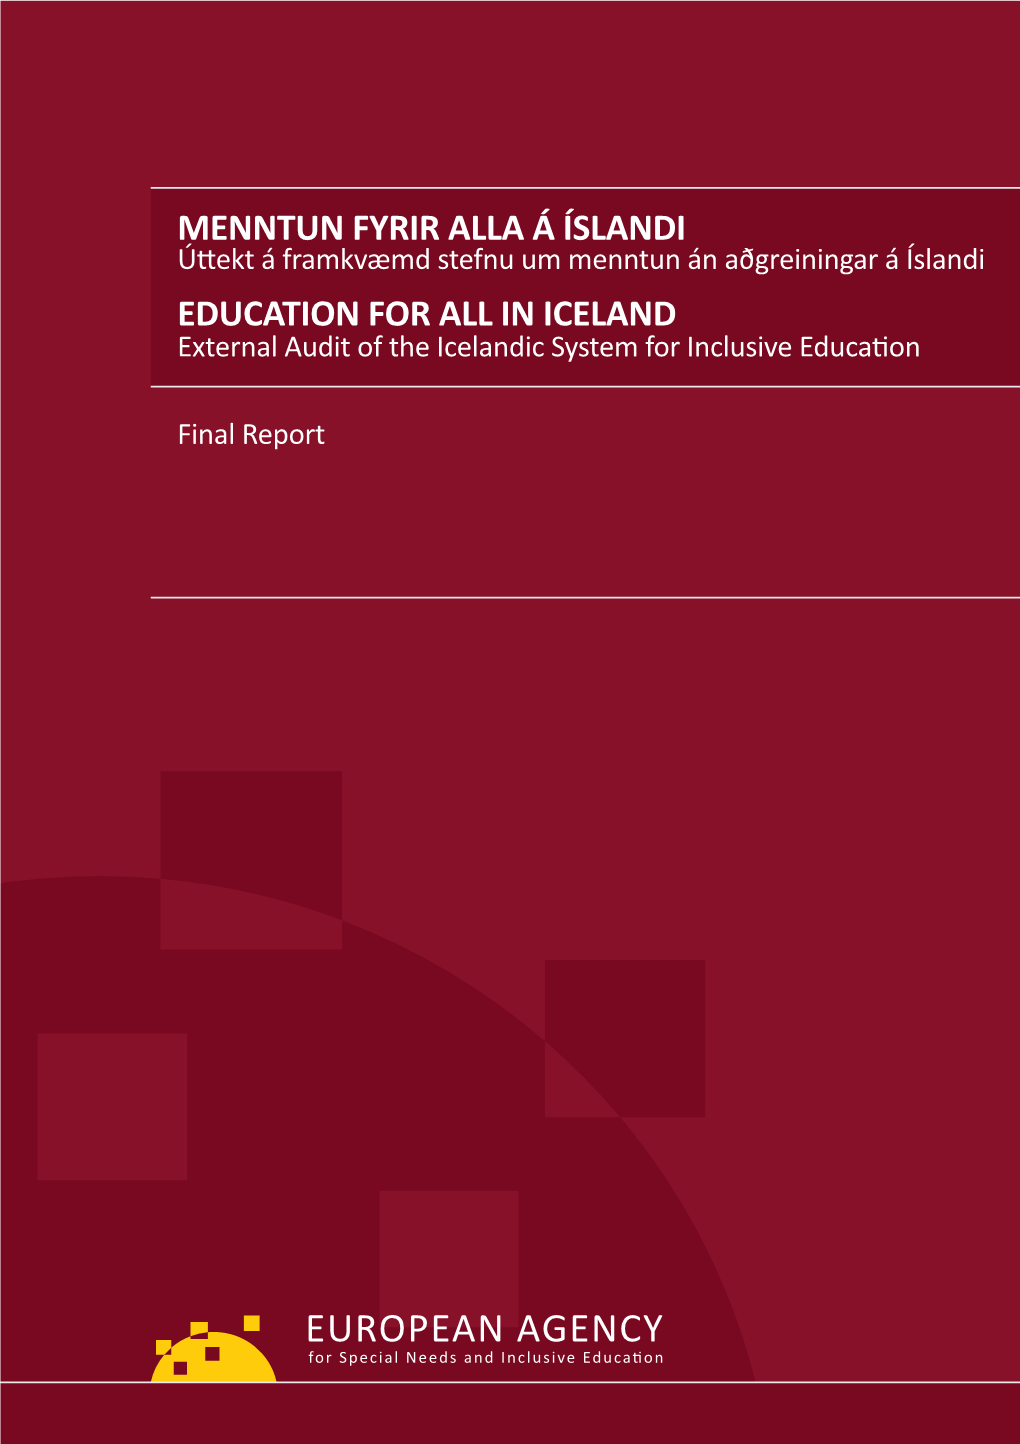 External Audit of the Icelandic System for Inclusive Education Secretariat@European-Agency.Org